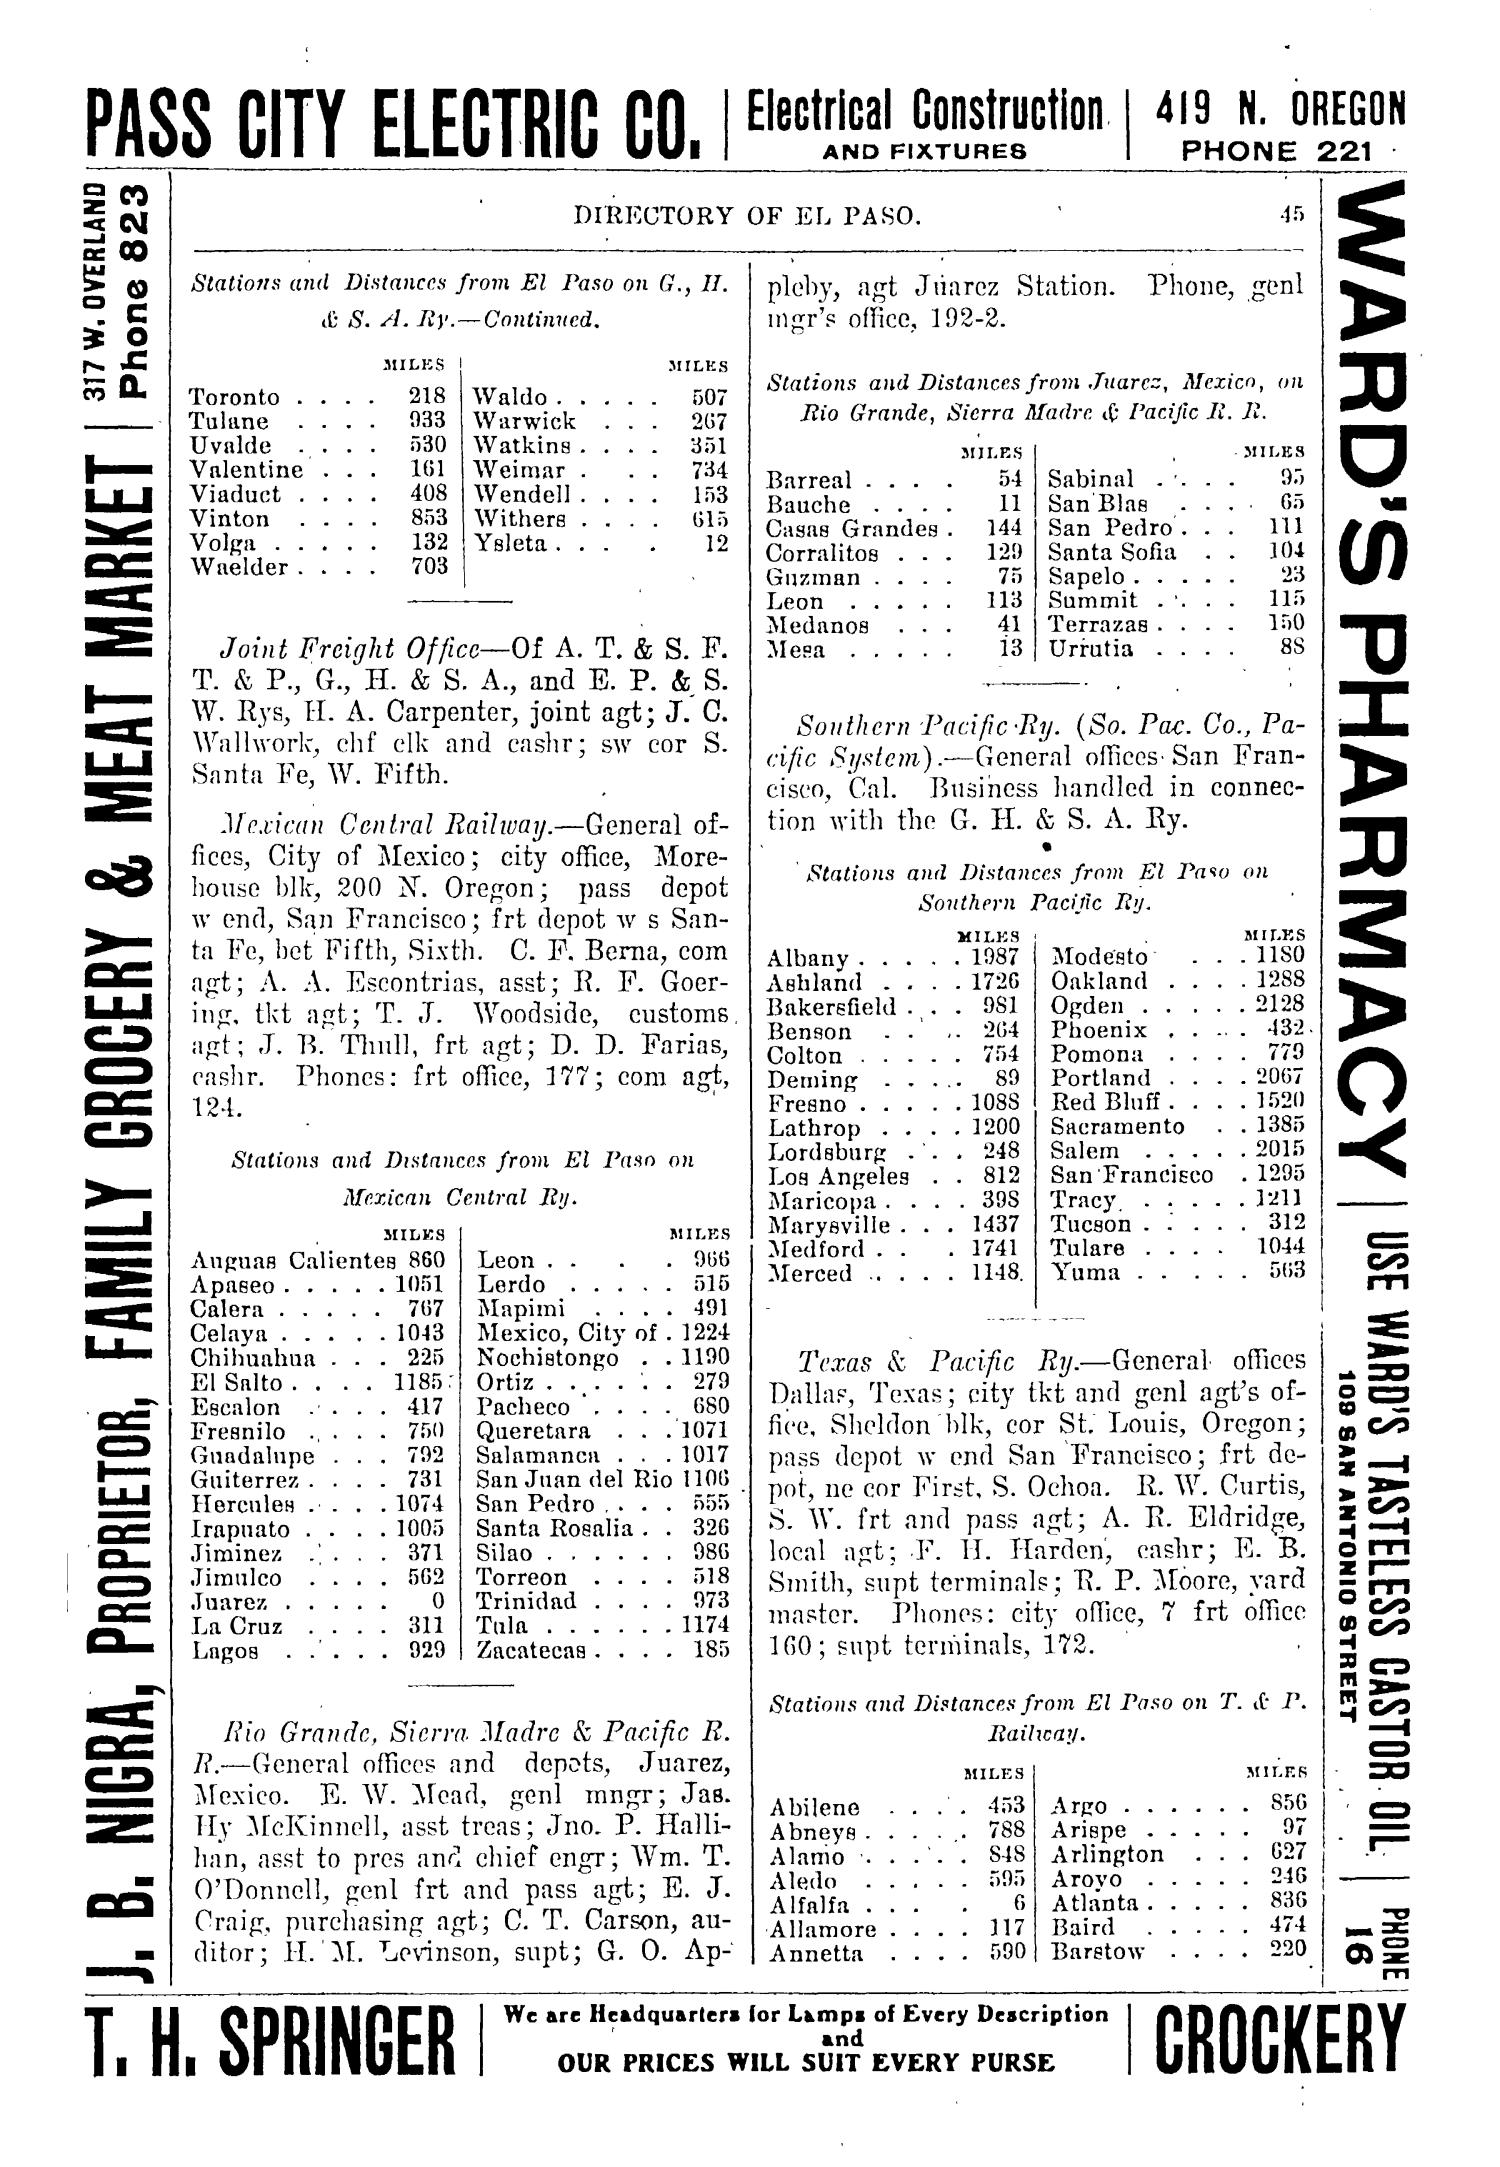 John F. Worley & Co.'s El Paso Directory for 1906
                                                
                                                    45
                                                